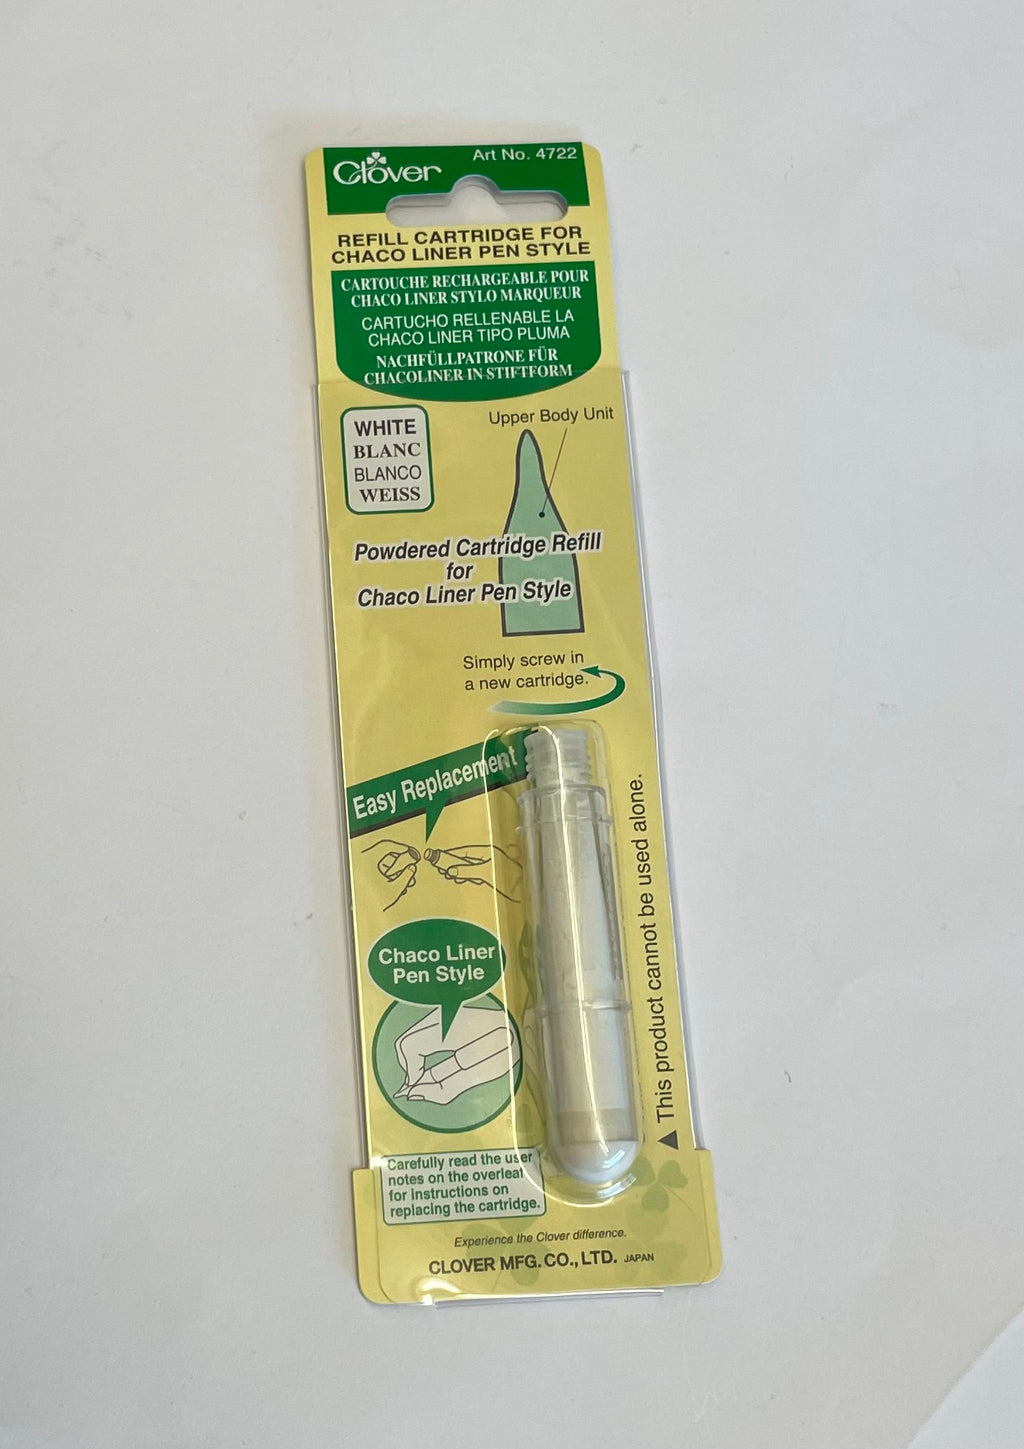 Clover Refill Cartridge for Chaco Liner Pen Style White